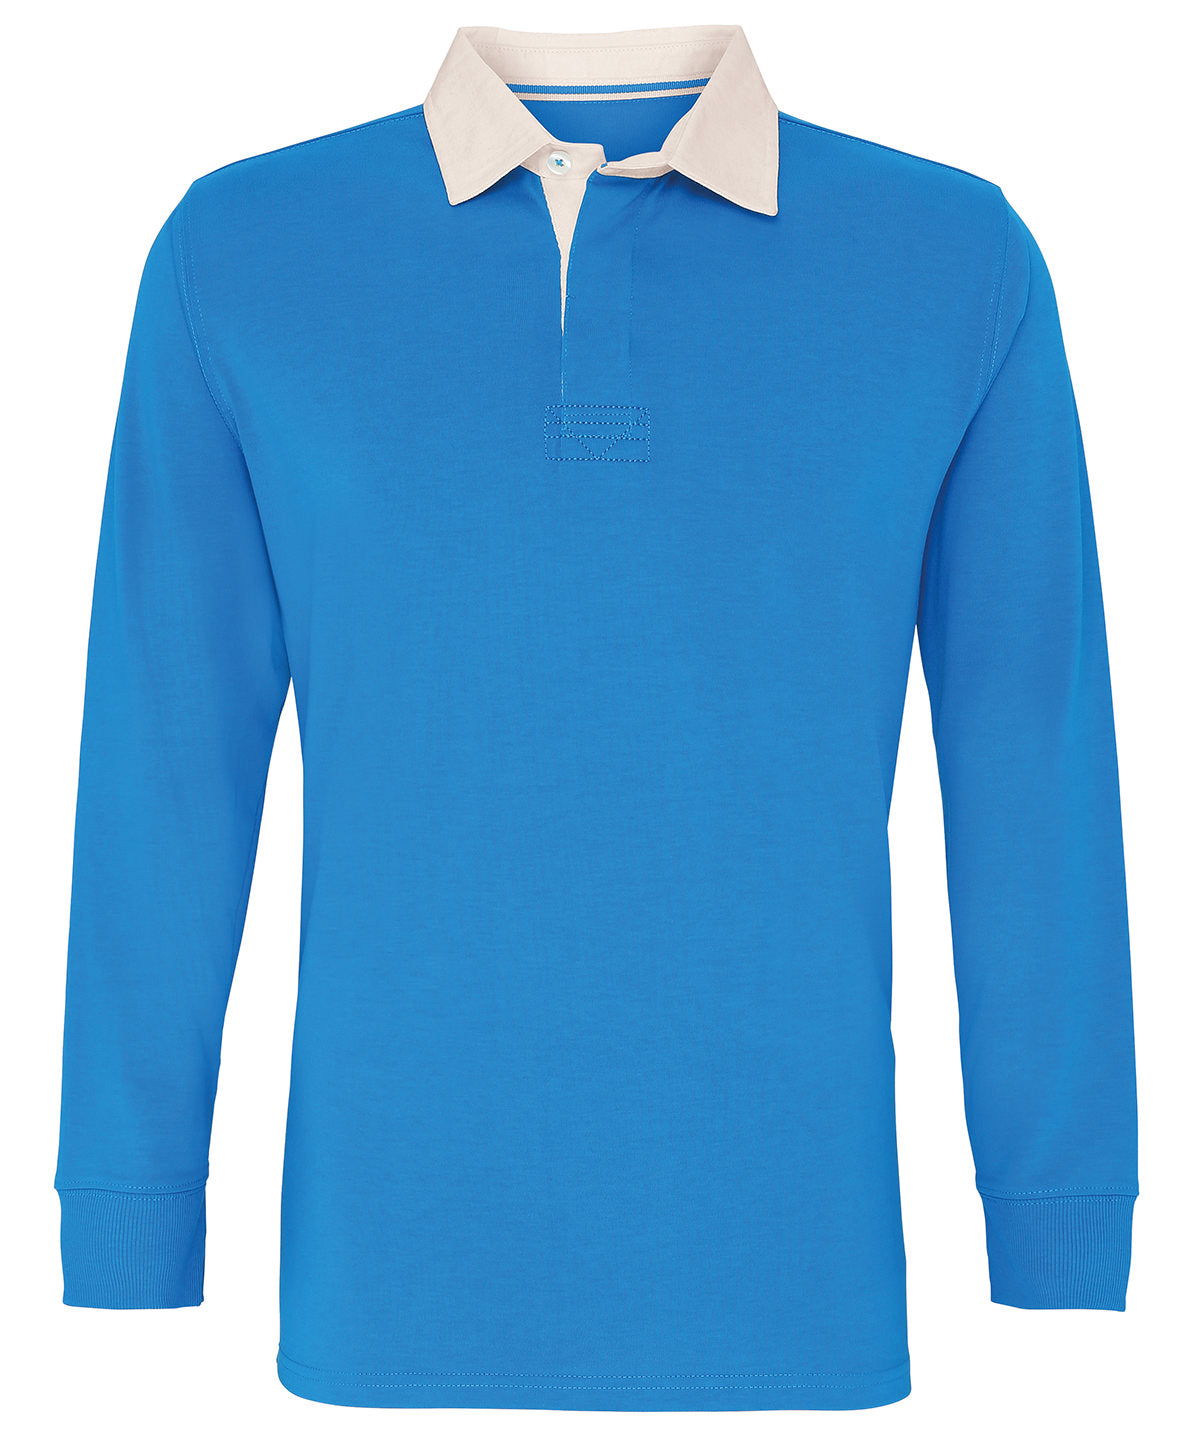 Men's Classic Fit Long Sleeved Vintage Rugby Shirt